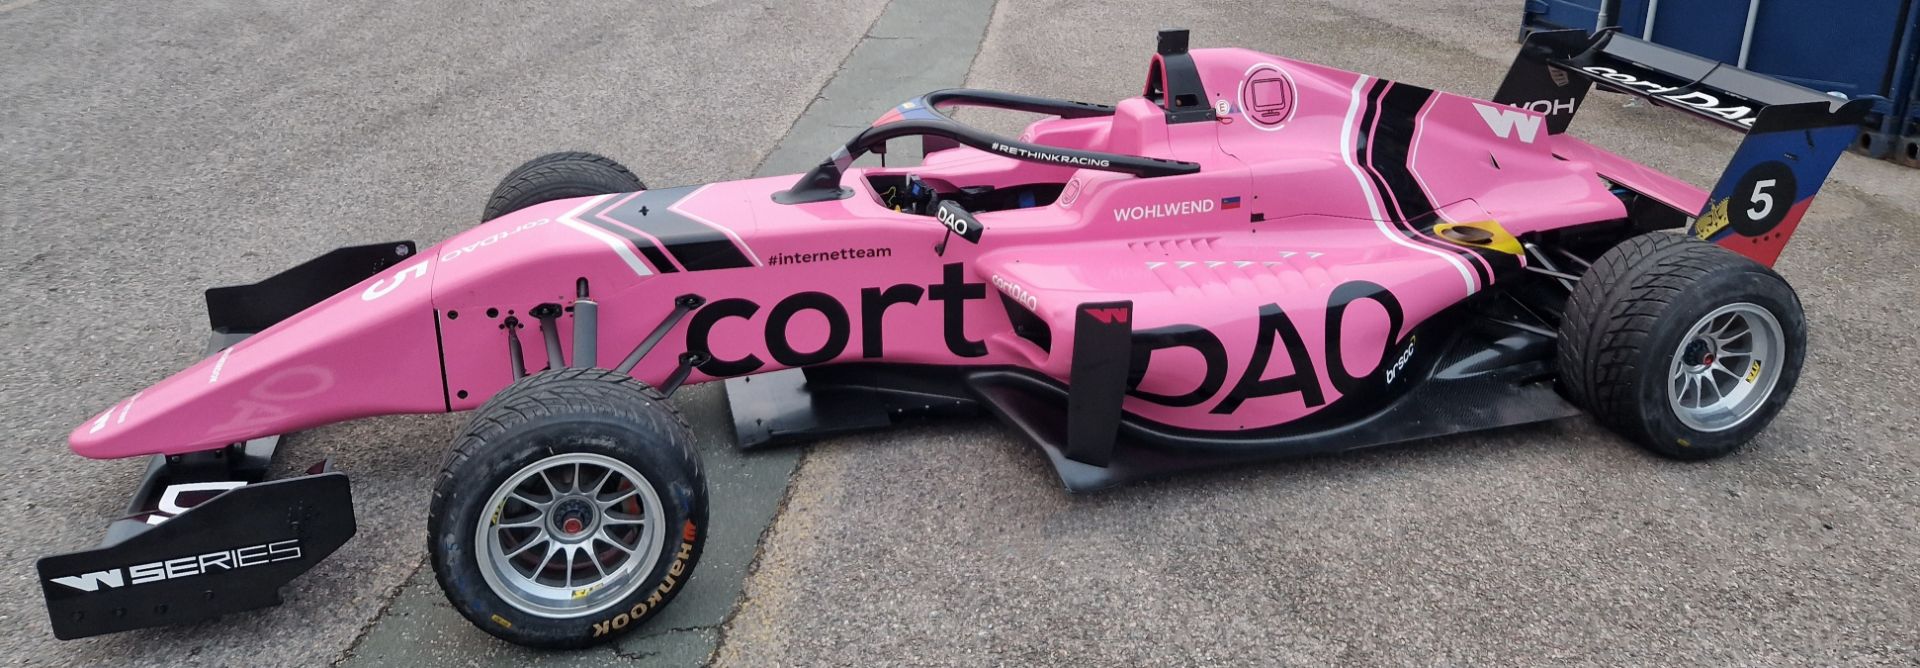 One TATUUS F3 T-318 Alfa Romeo Race Car Chassis No. 082 (2019) Finished in cortDAO Livery as